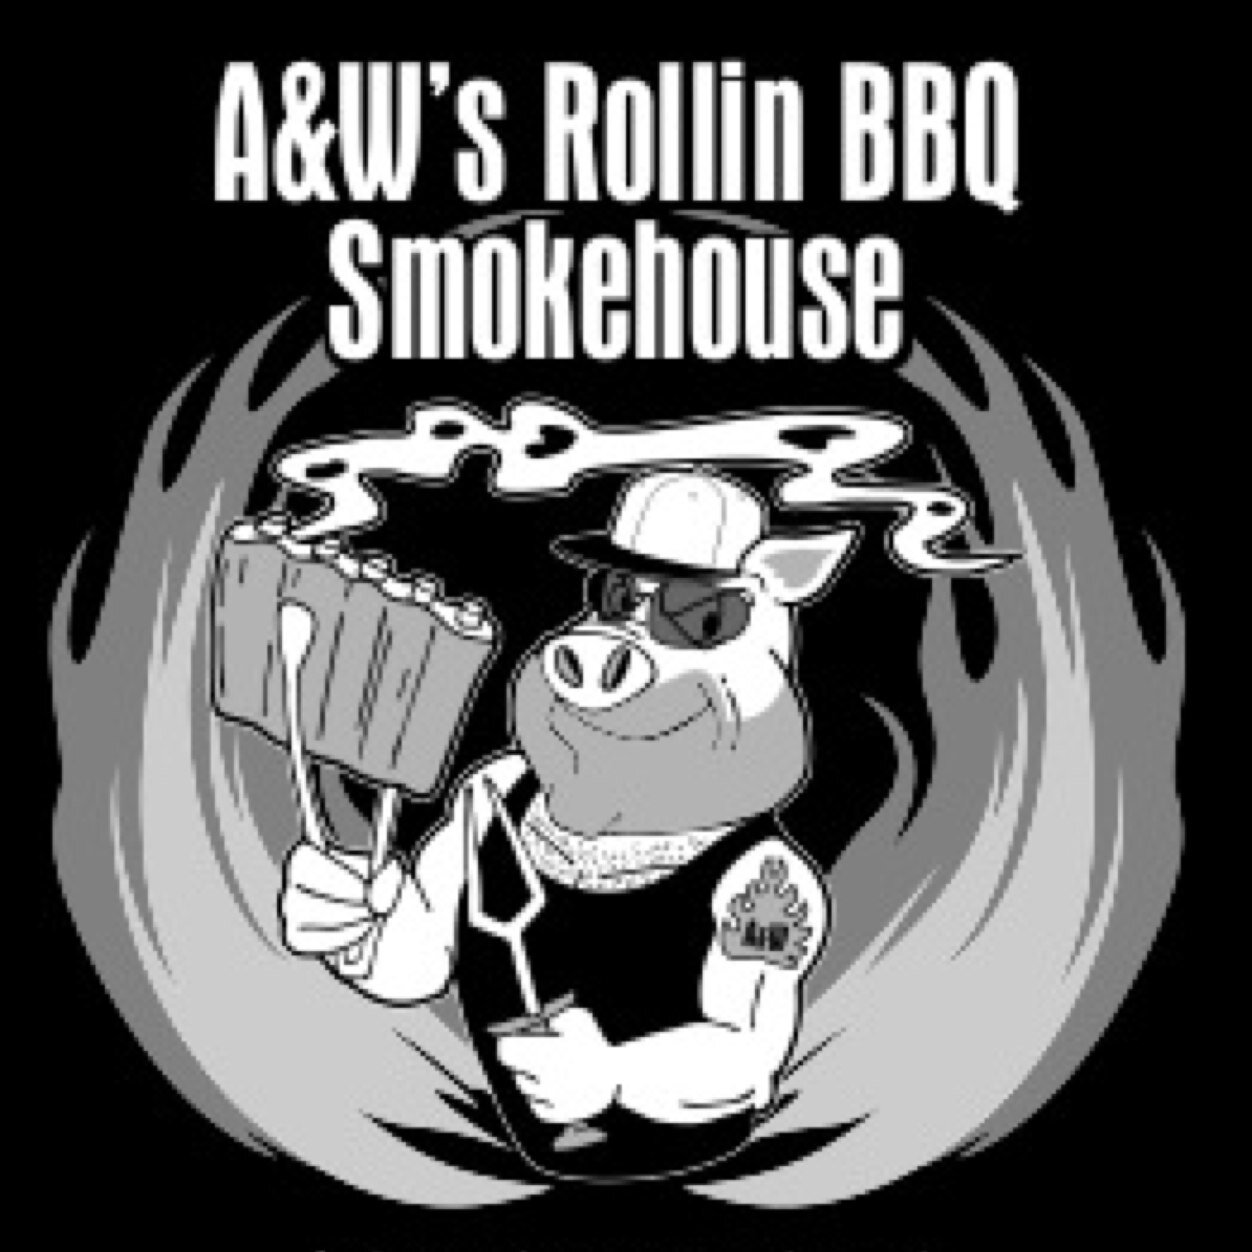 Were a mobile bbq smokehouse that located in maryland we do it all rIbs pulled pork pulled chicken and more let us cater your next event